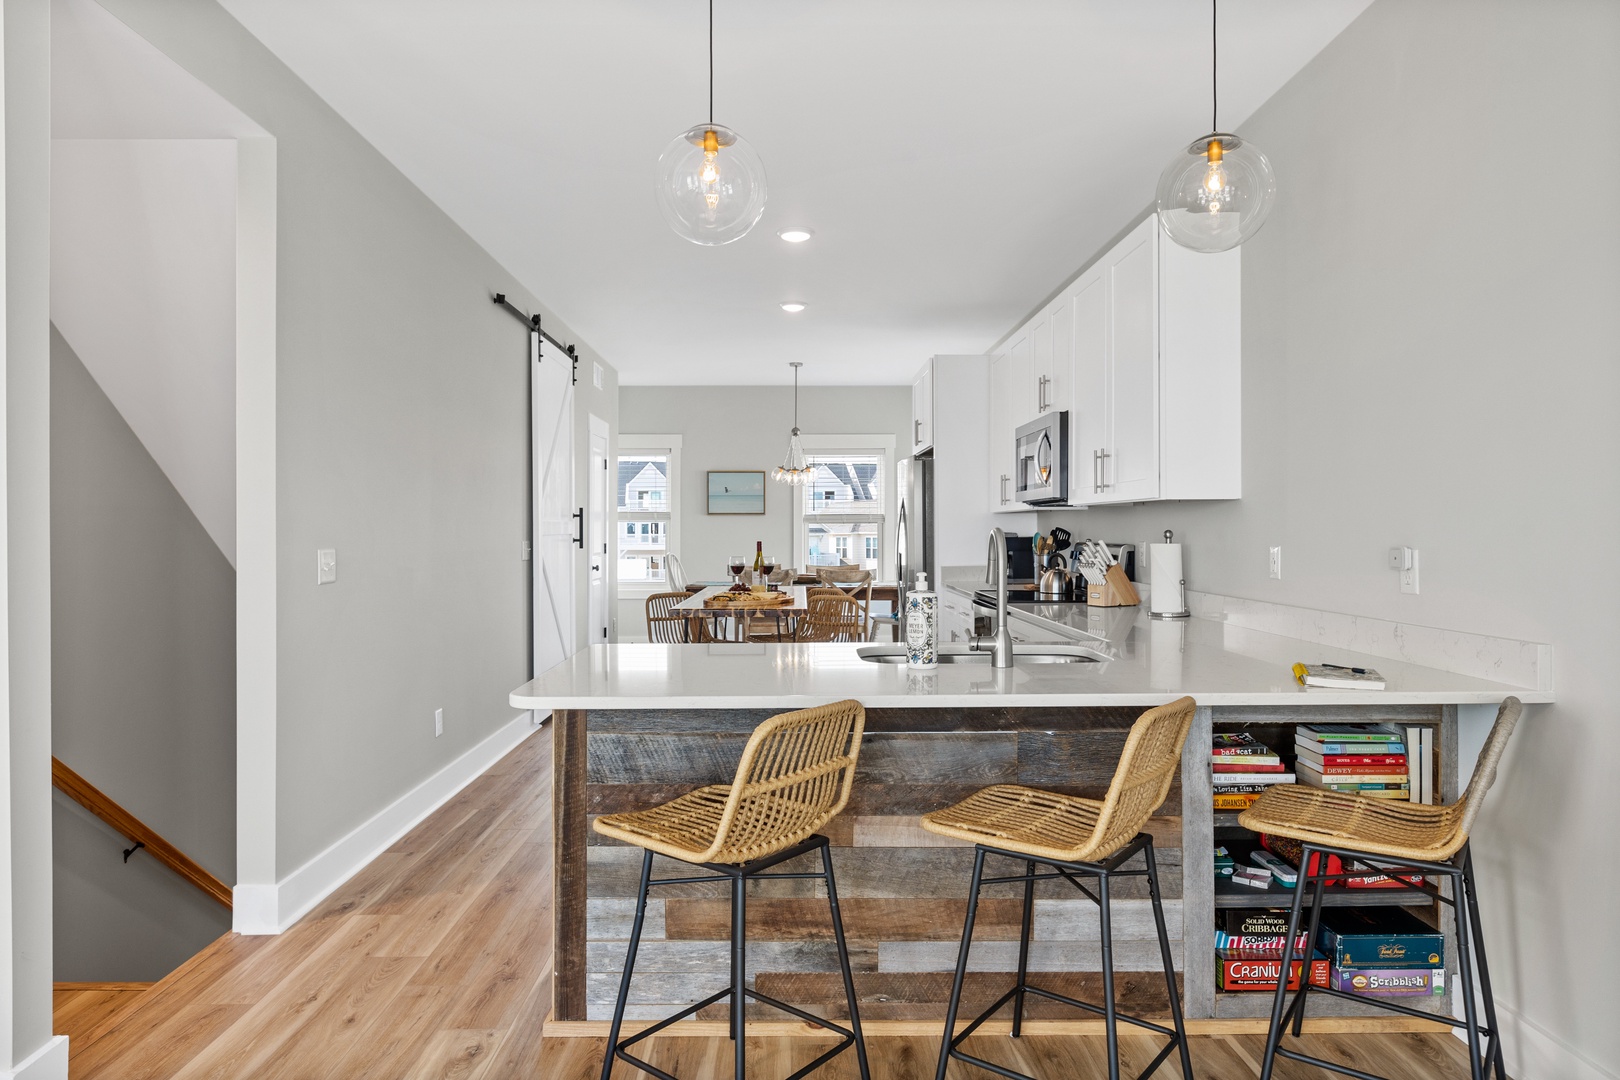 The well-stocked kitchen with countertop seating for 3 and island seating for 2